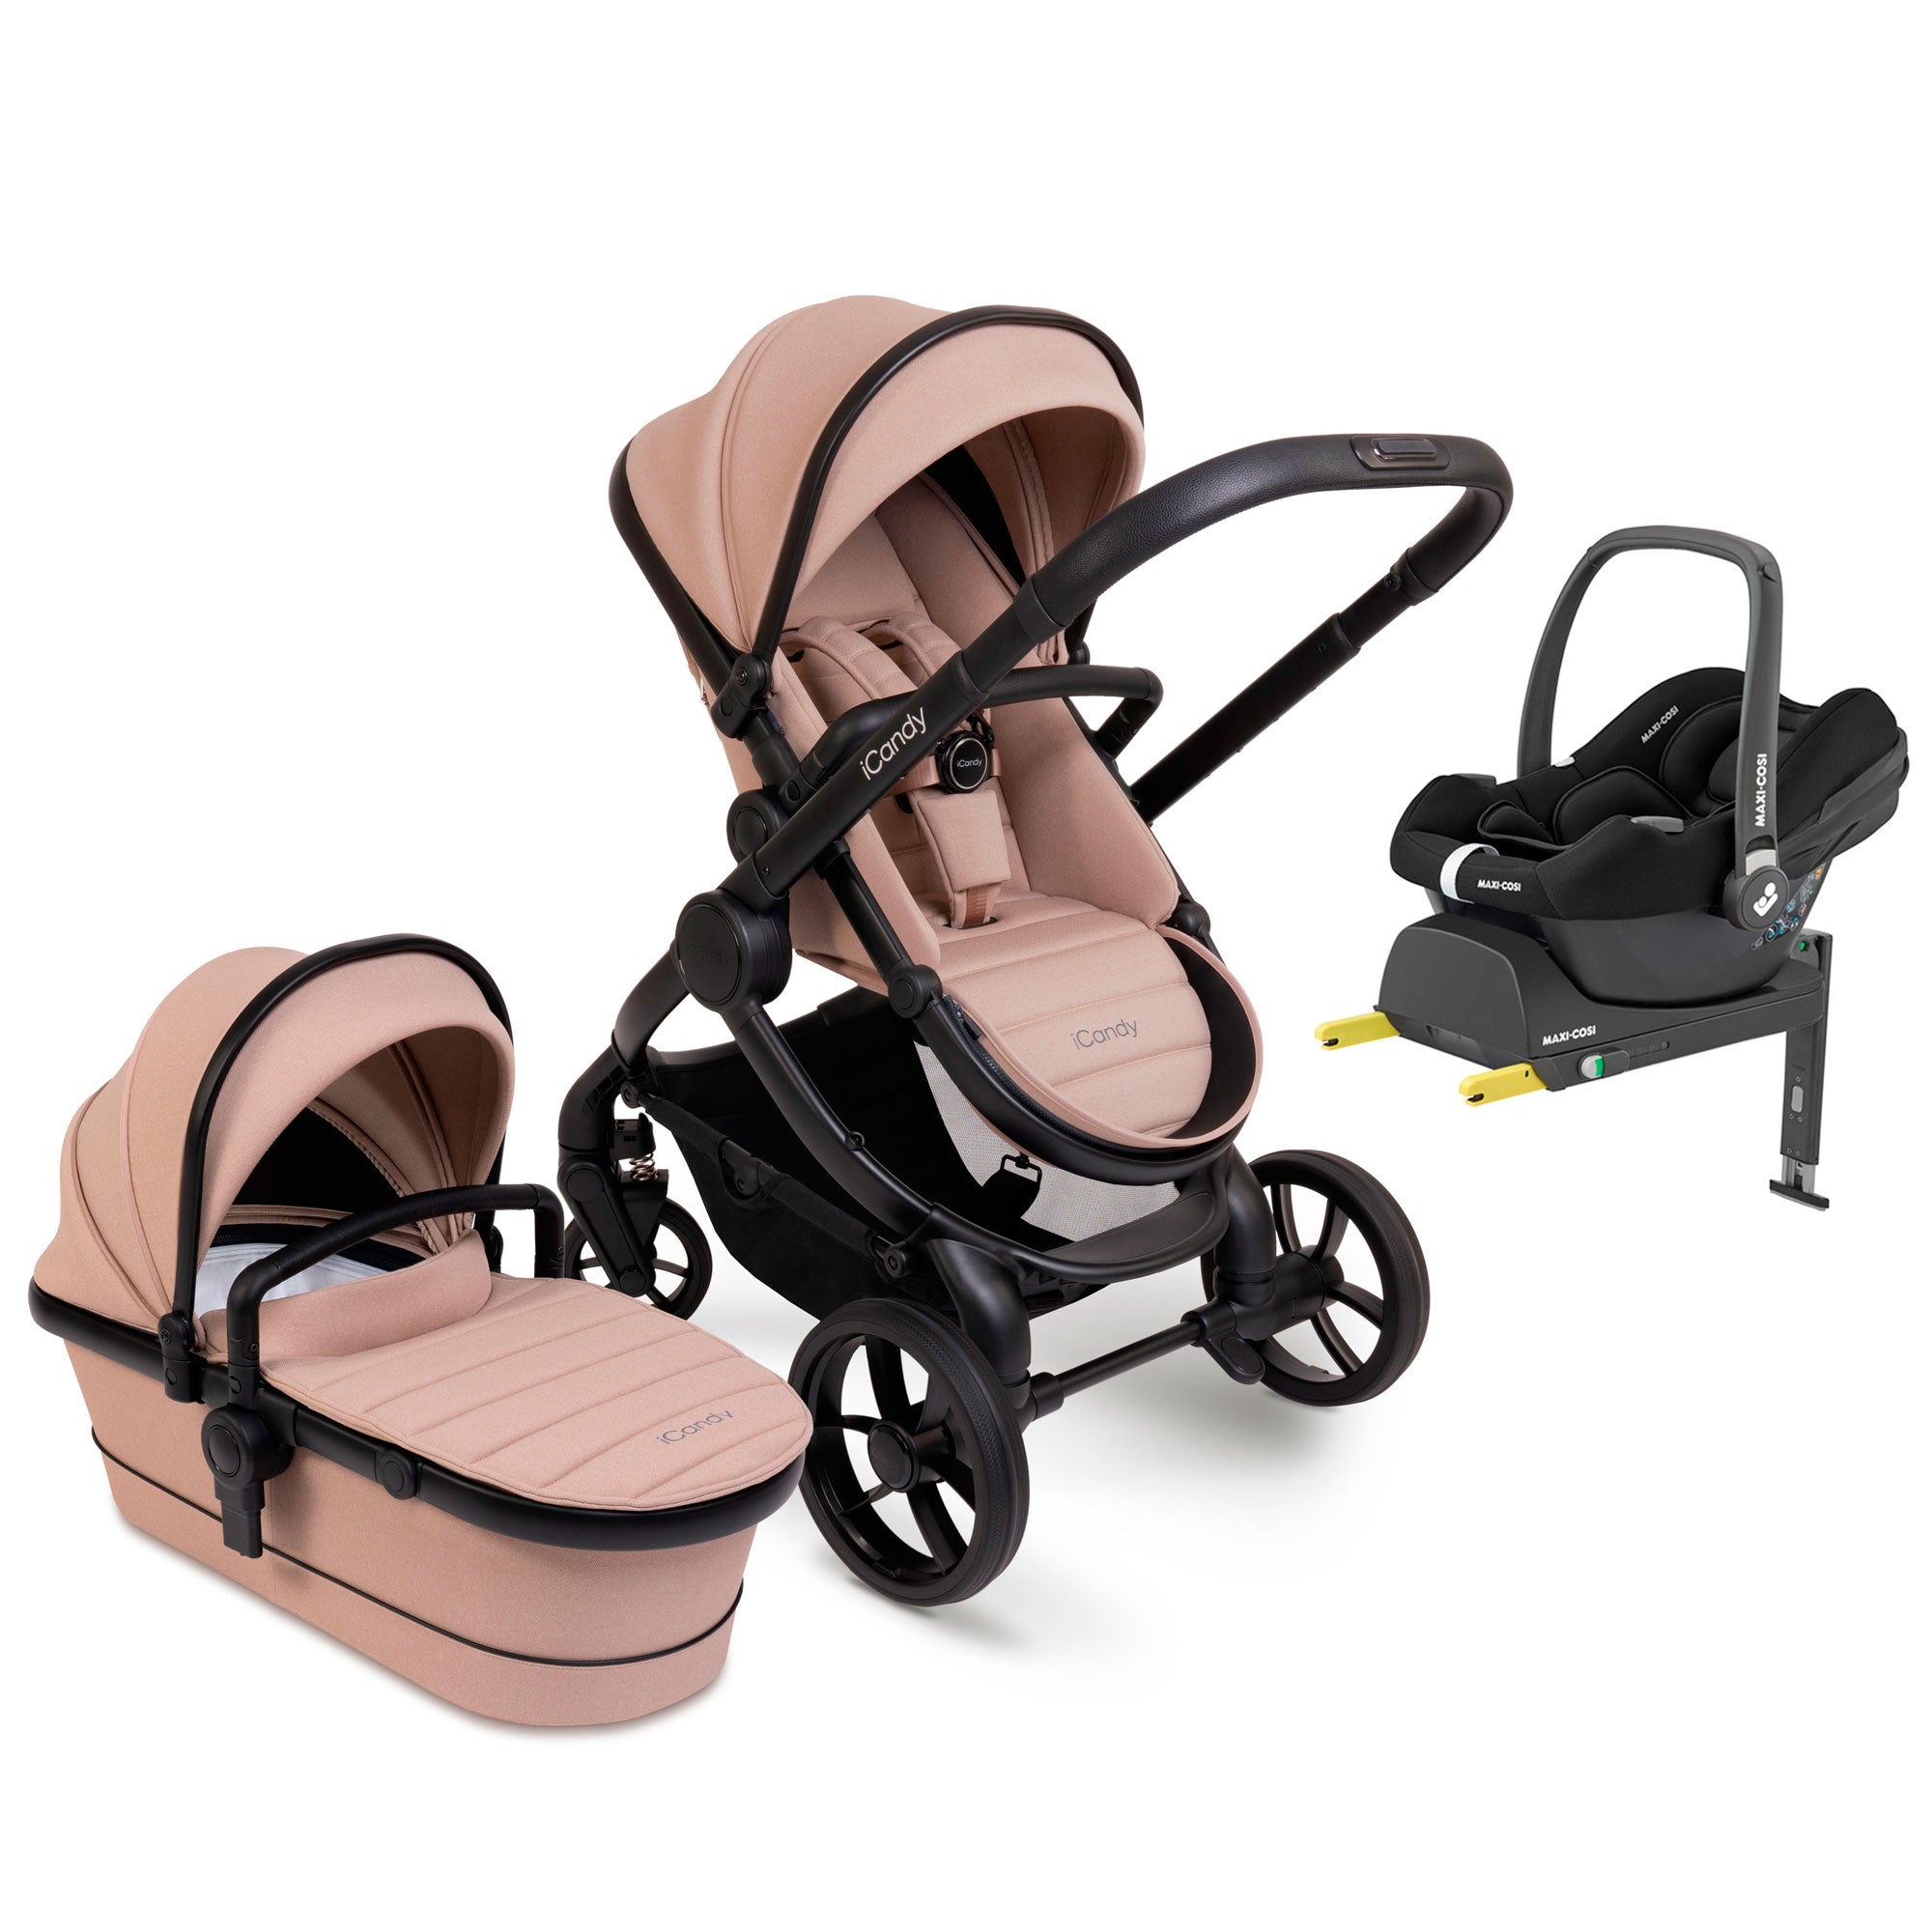 iCandy Peach 7 Maxi-Cosi Combo Set in Cookie